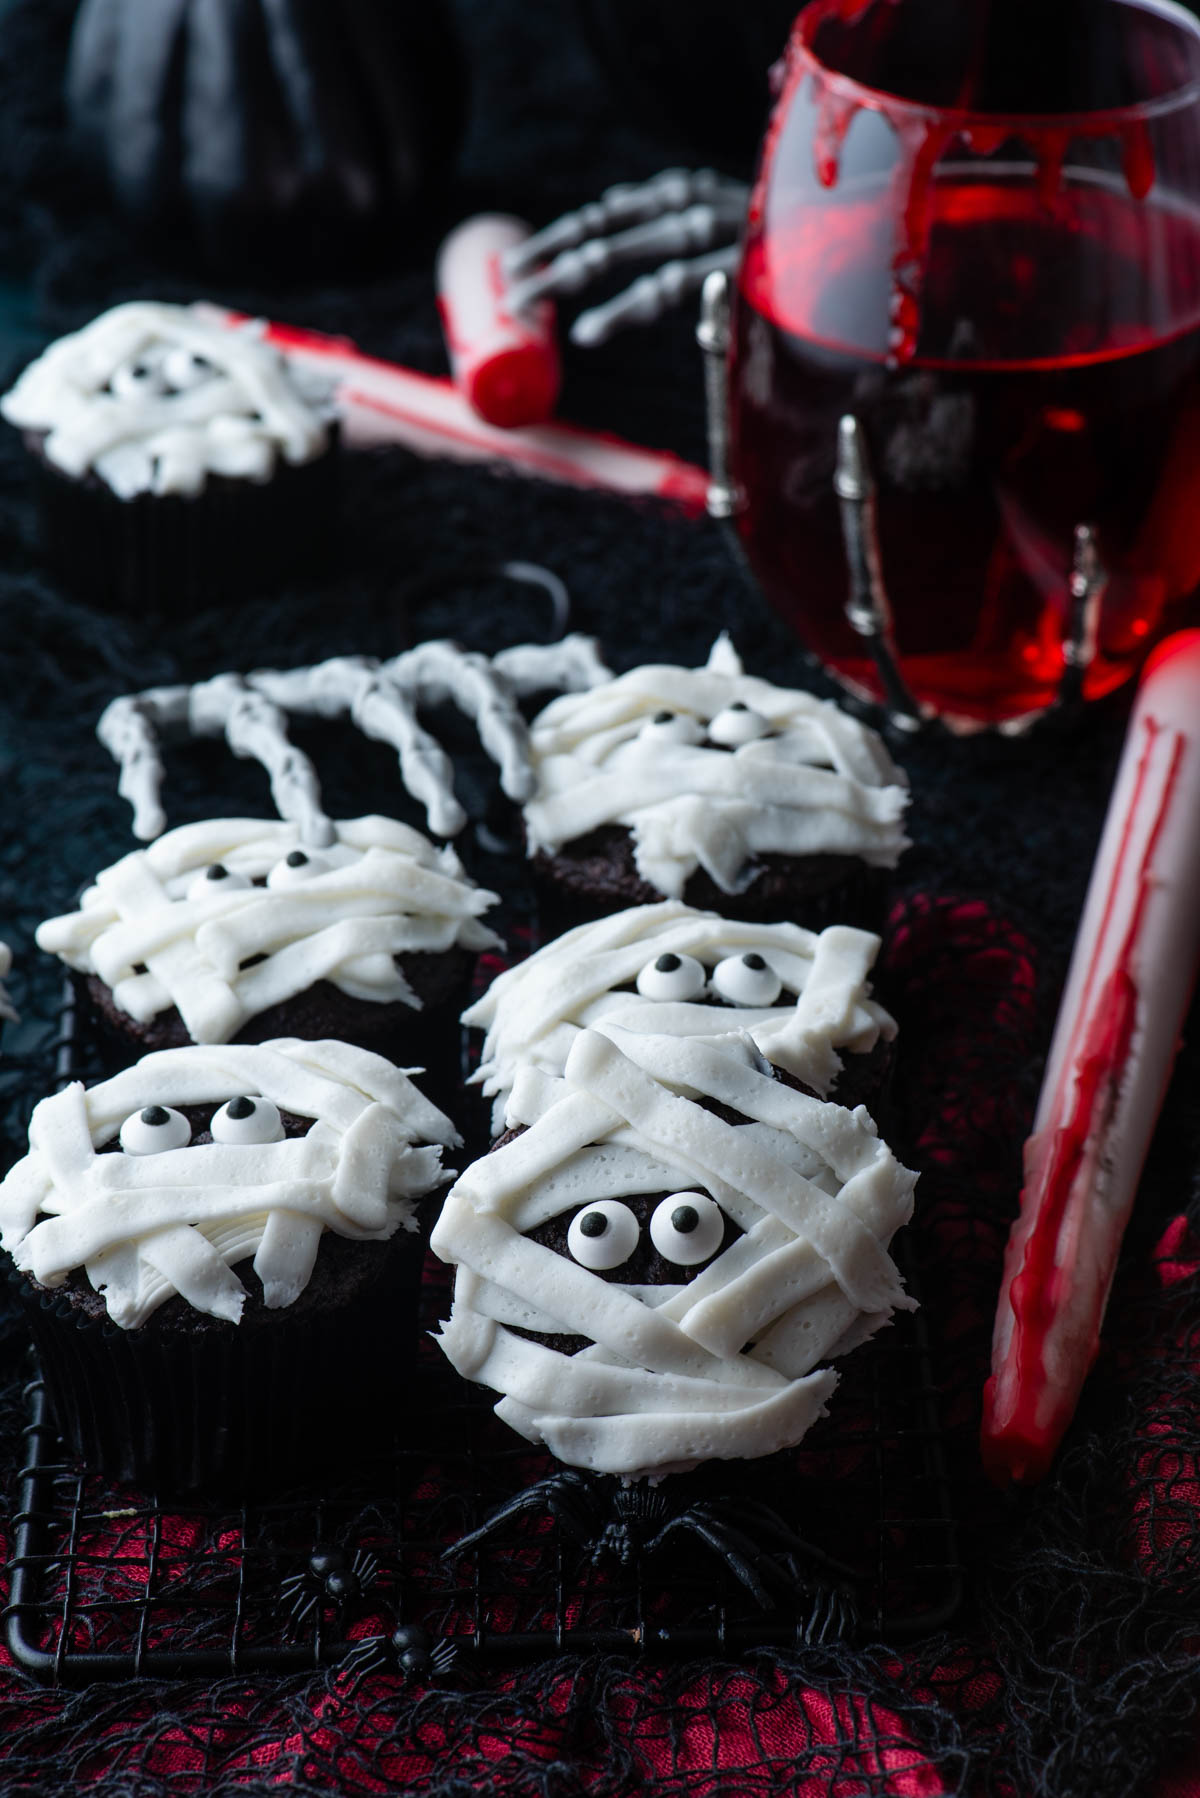 mummy cupcakes on a black and red surface with a glass of red liquid, a skeleton hand and little black plastic spiders scattered around